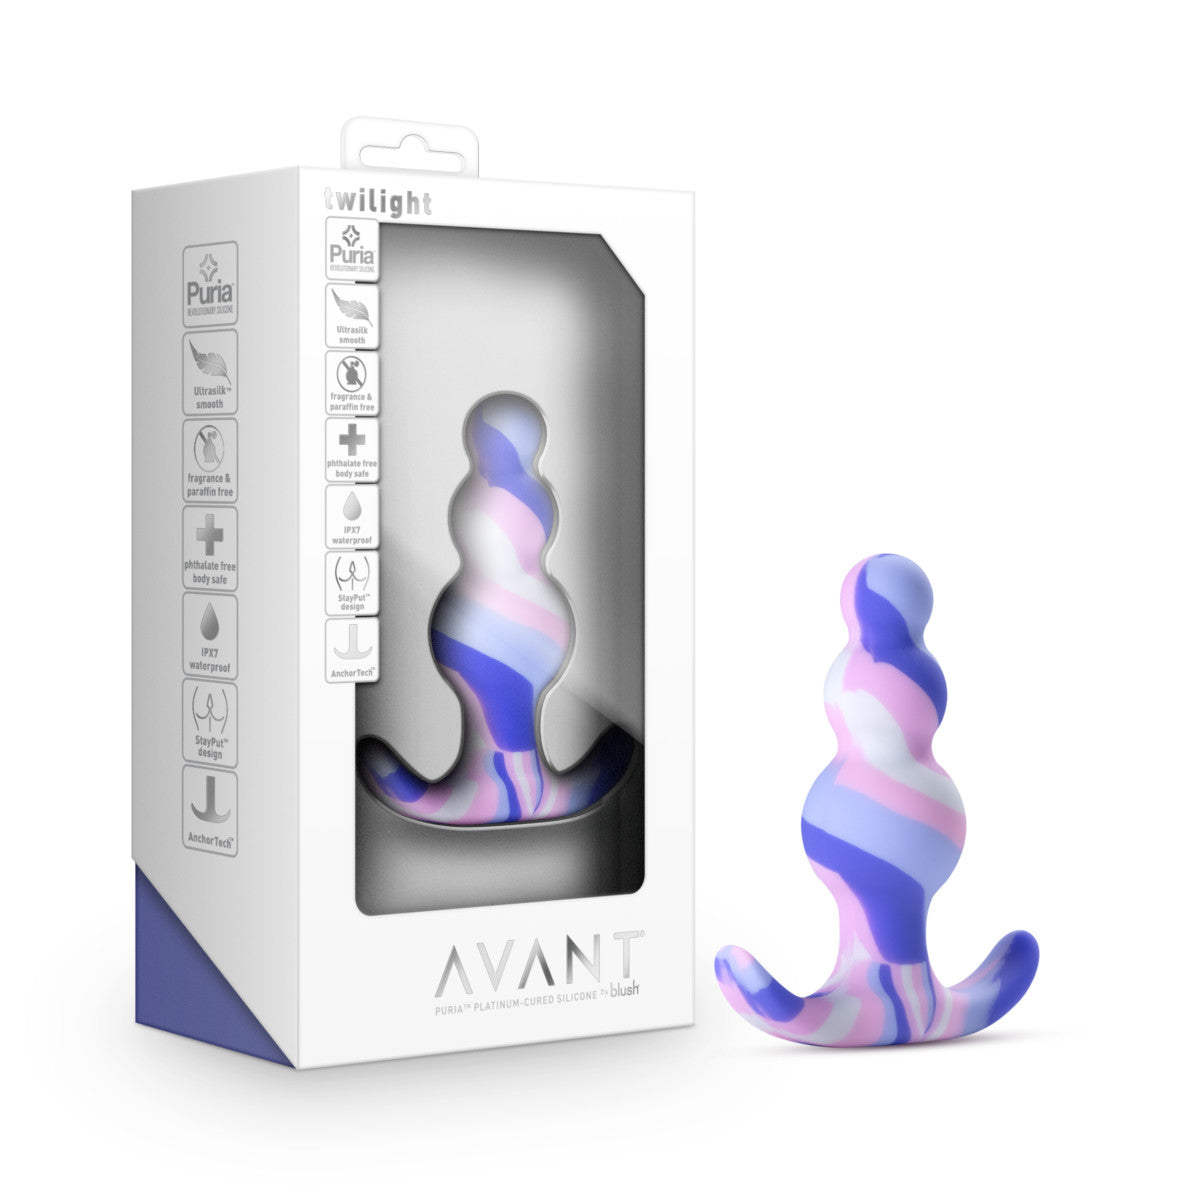 Avant | Twilight Blue: Artisan 3 Inch Tapered Stayput™ Butt Plug with Pleasure Curves - Elegantly Made with Smooth Ultrasilk® Purio™ Silicone